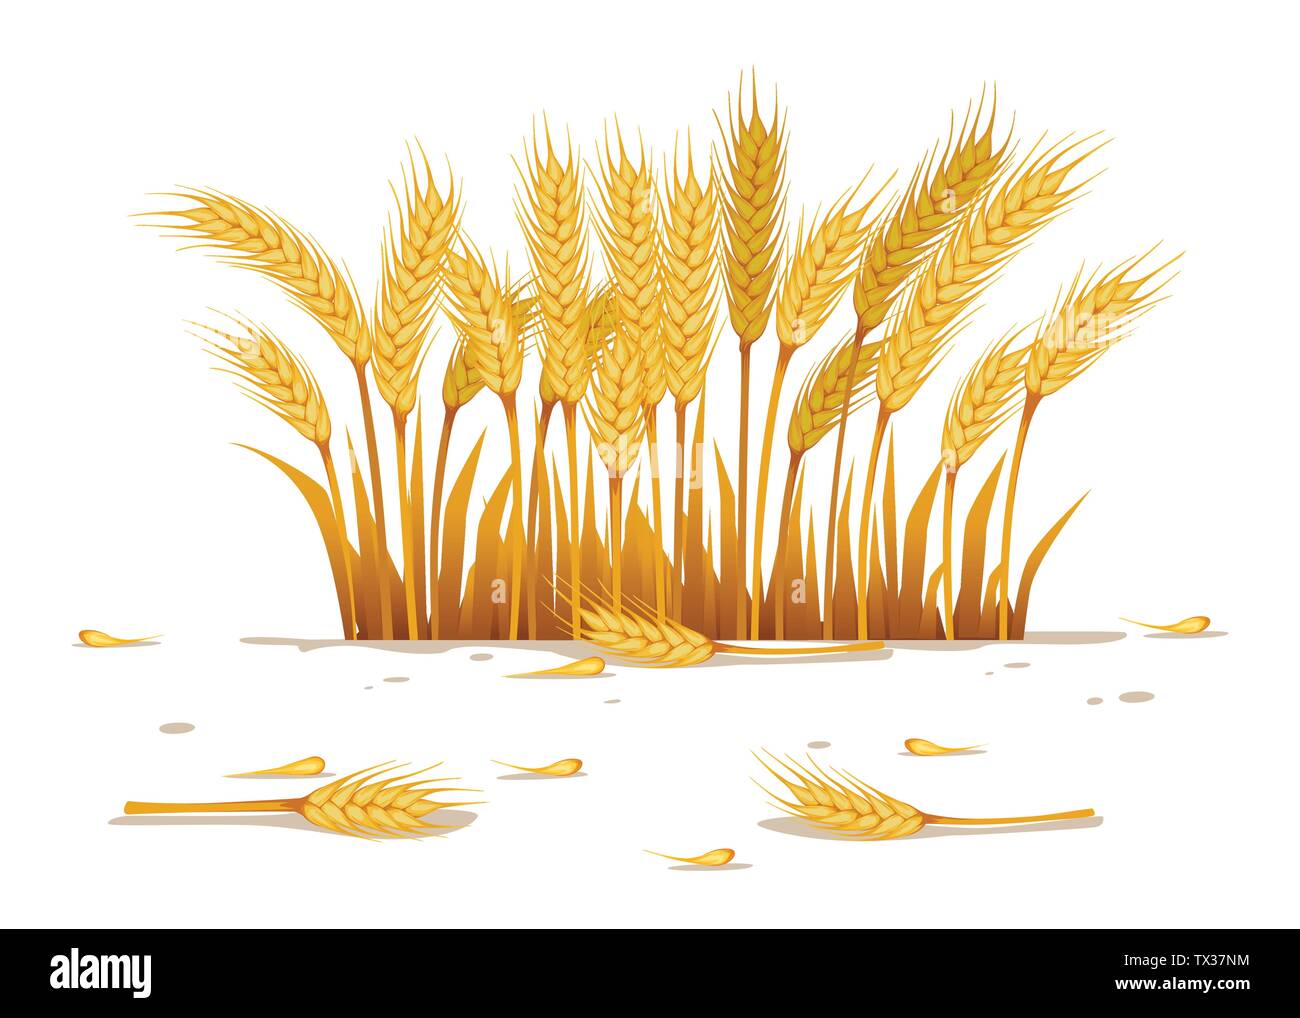 Small wheat field for rural landscape illustration on white background. Stock Vector